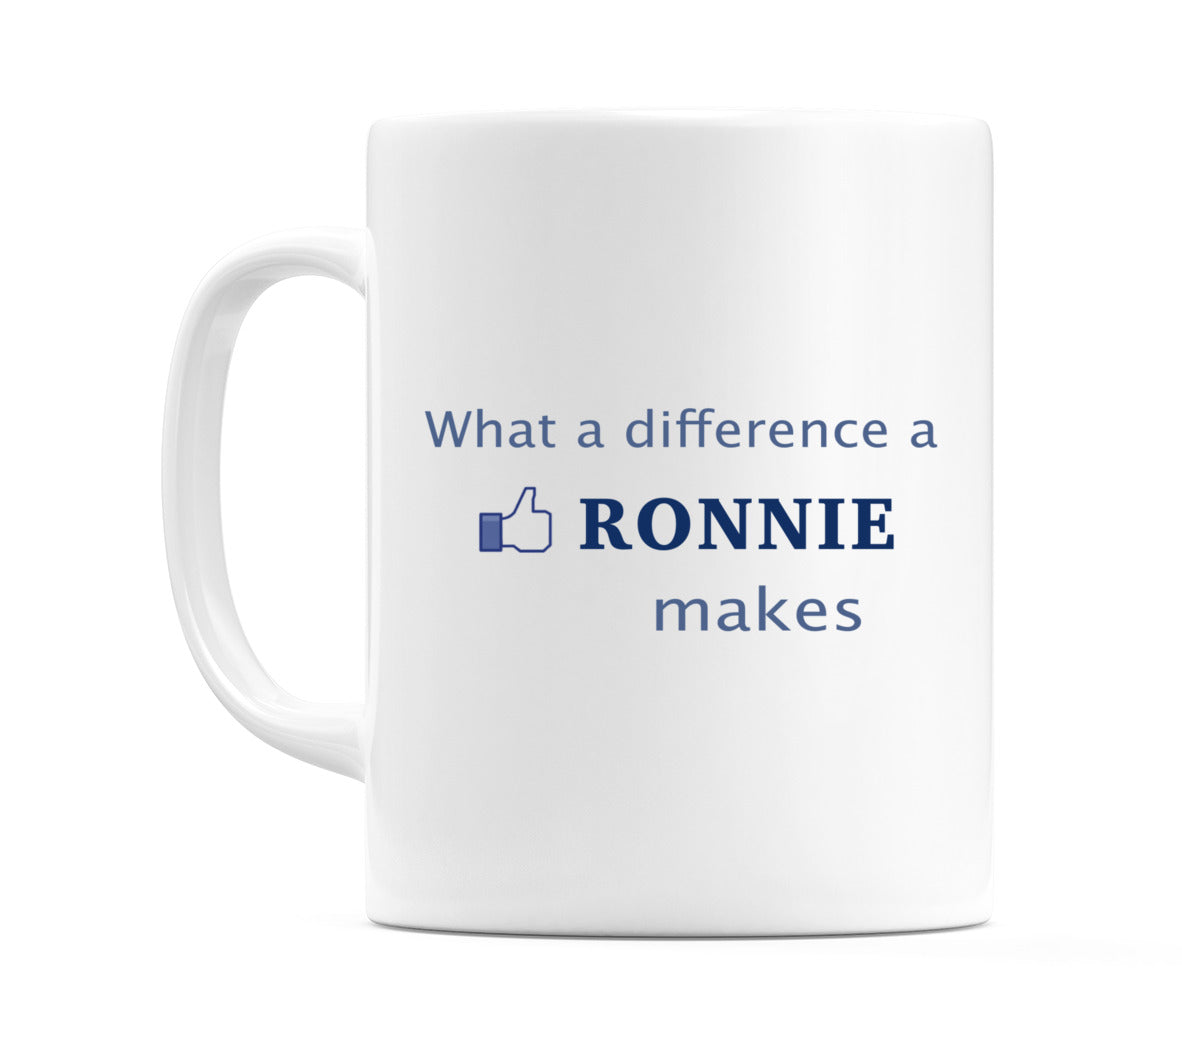 What a difference a Ronnie makes Mug